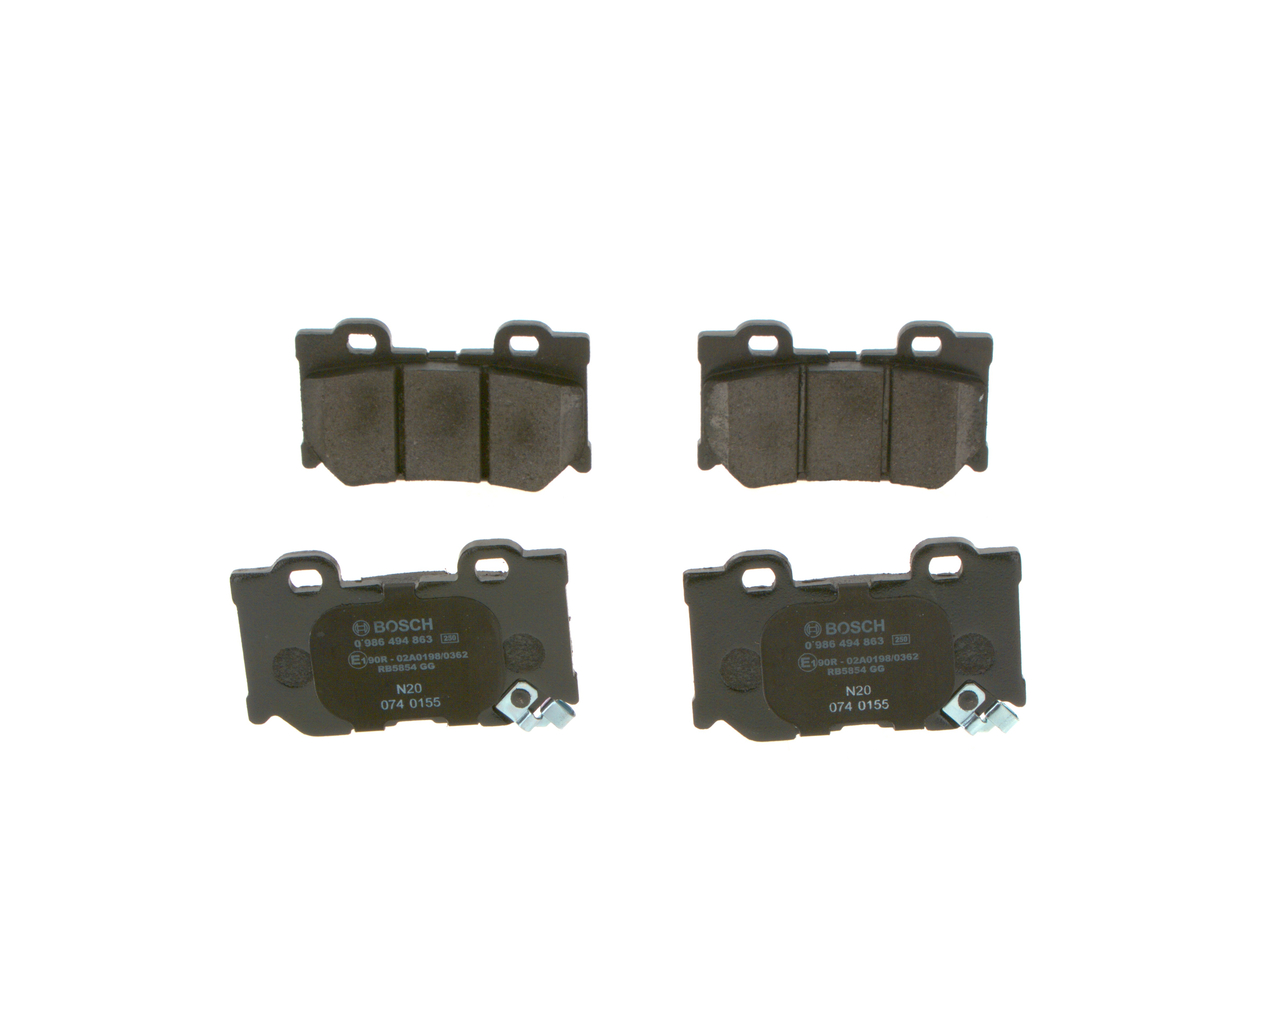 BOSCH 0 986 494 863 Brake pad set Low-Metallic, with acoustic wear warning, with anti-squeak plate